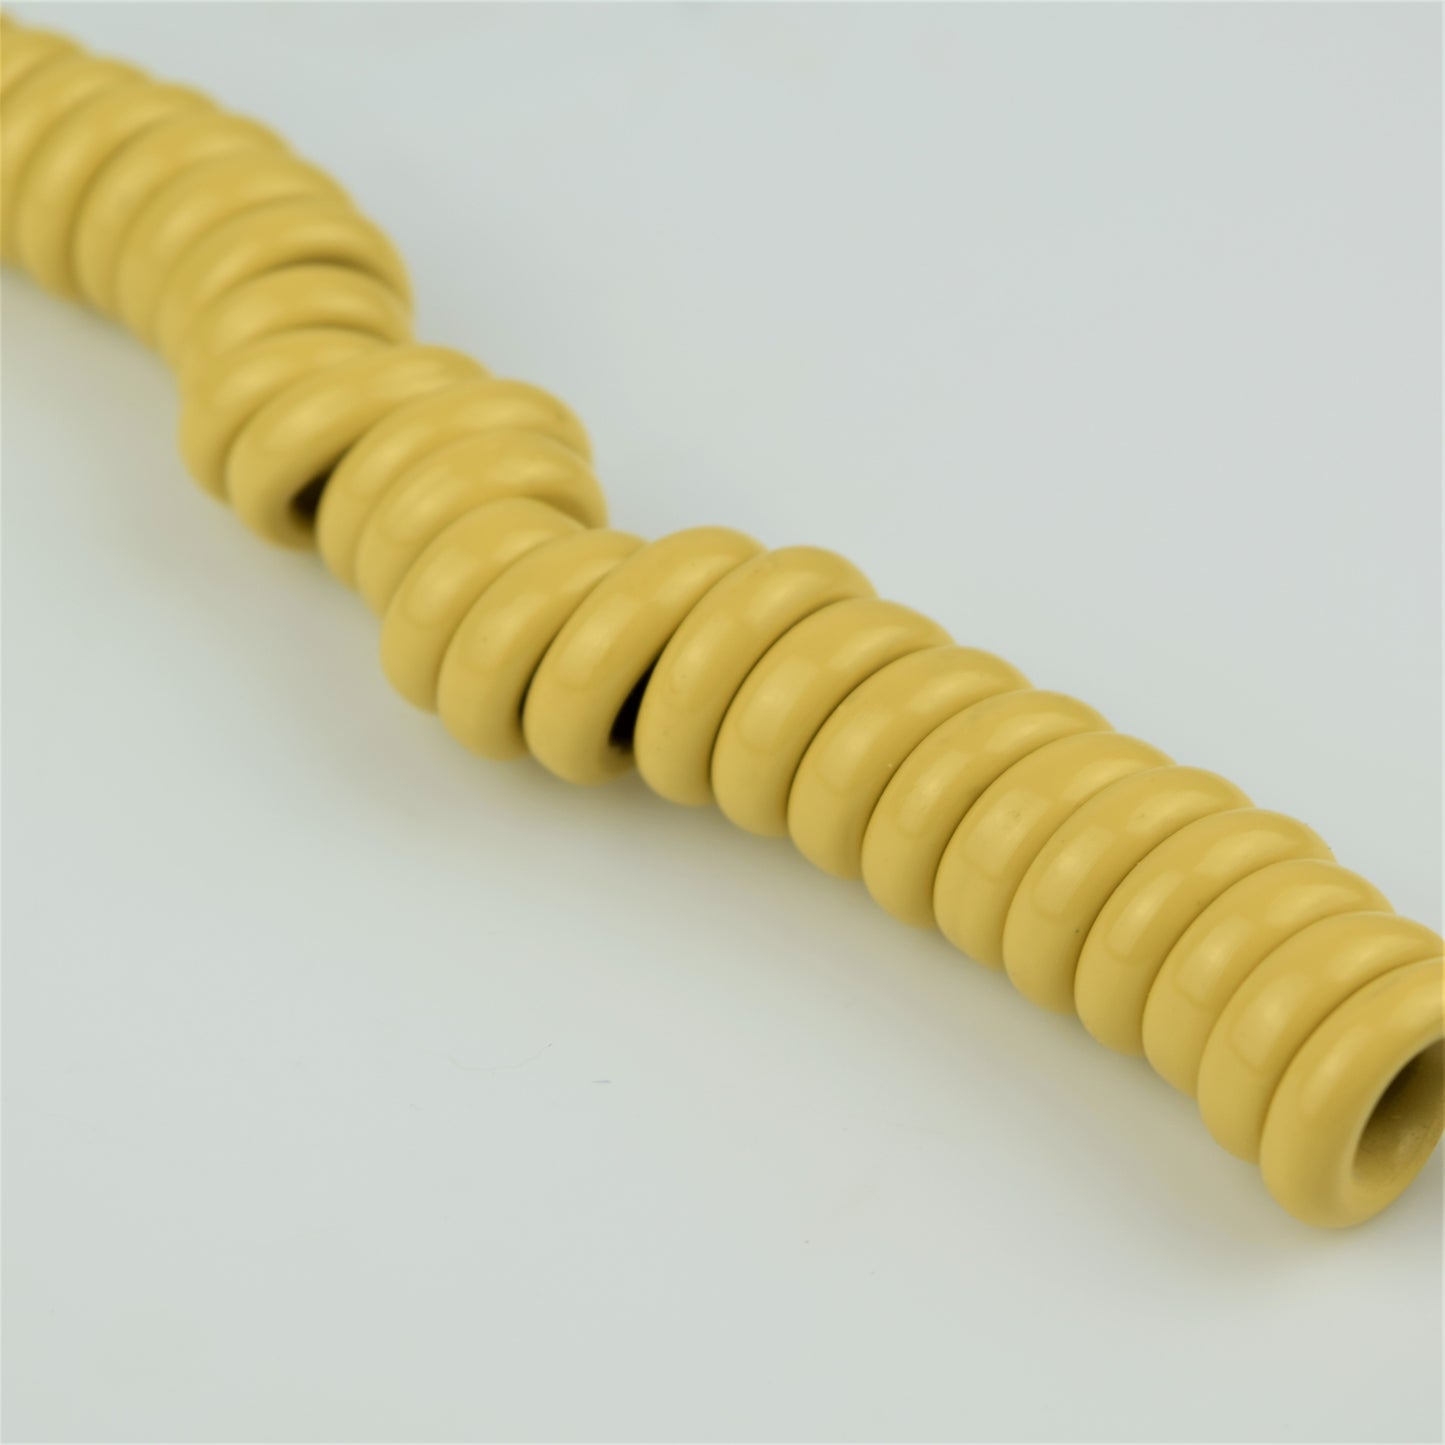 Cord - Harvest Gold - Hardwired Curly - 4 Conductor - Spade Terminations.